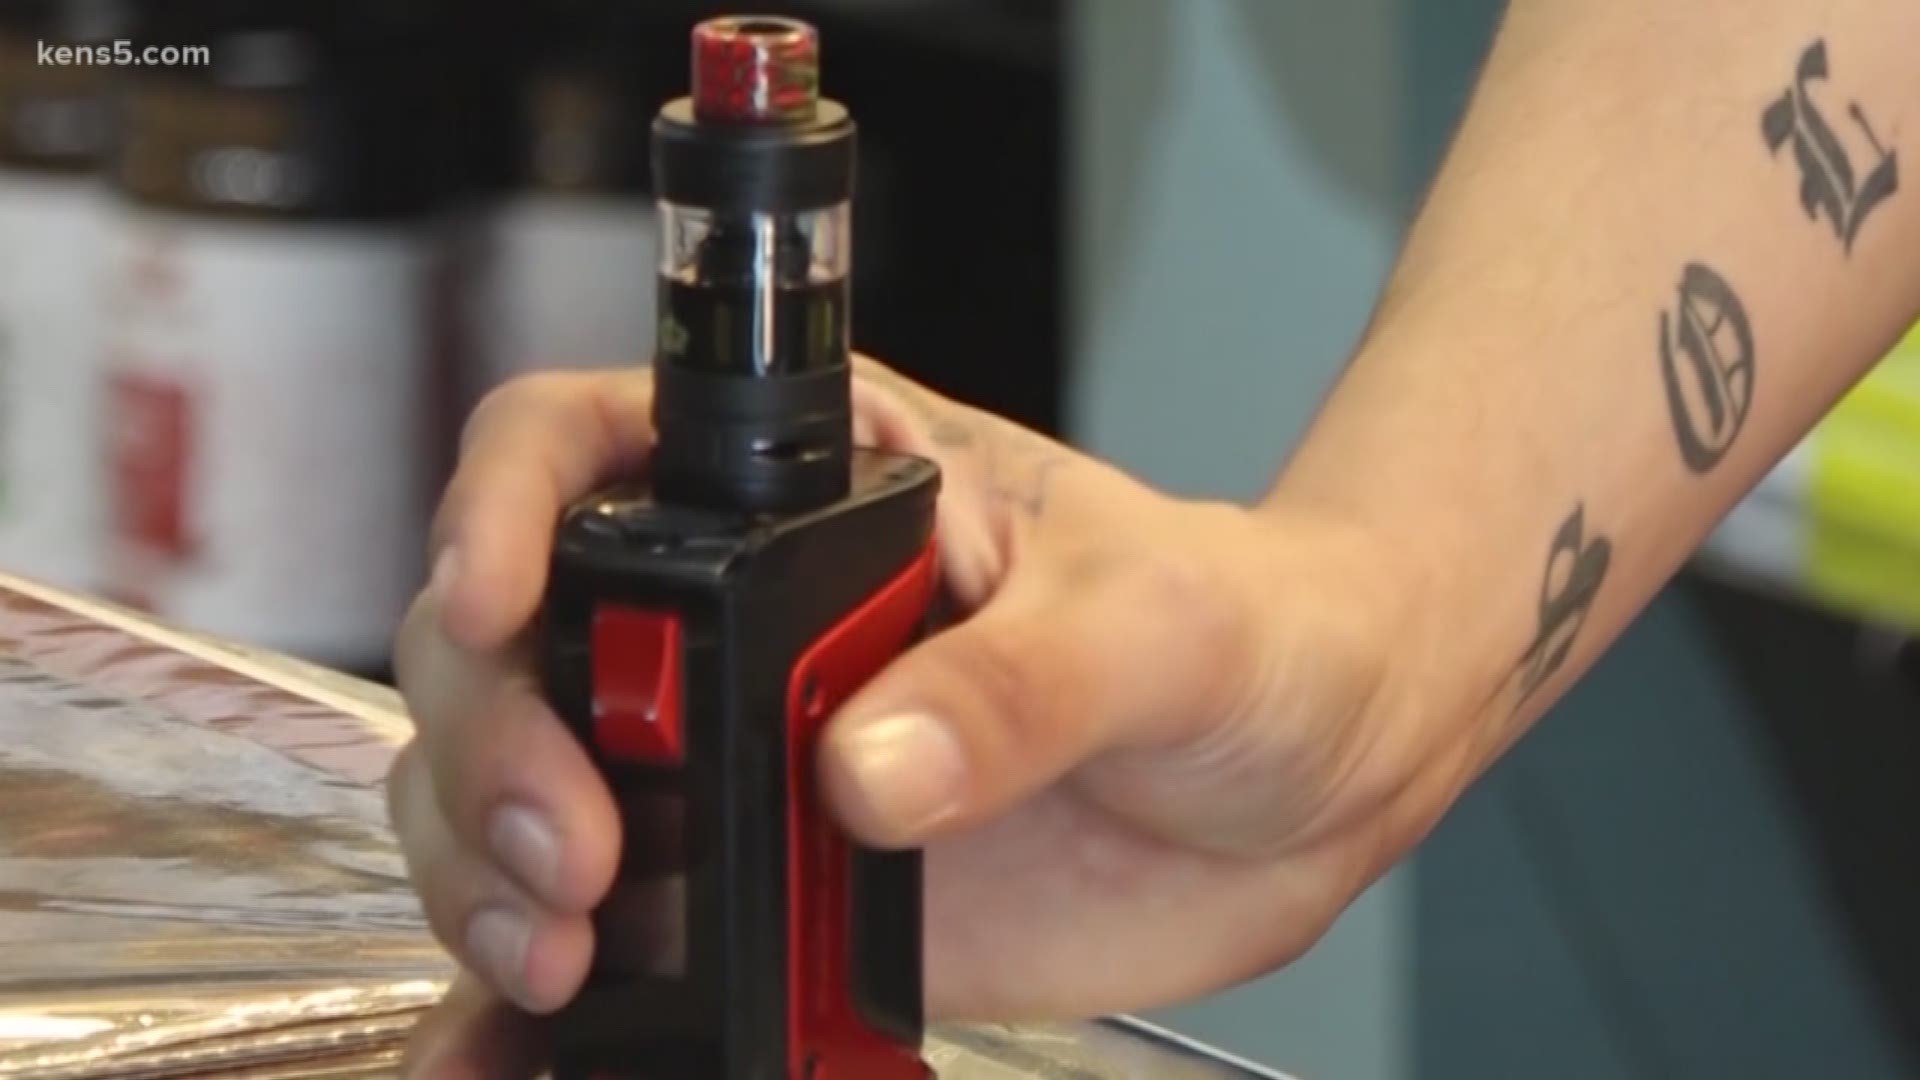 As hospitals across the country continue to treat hundreds of vape-related illnesses, a San Antonio school district is not holding back on their efforts to get the vapes out of their schools.